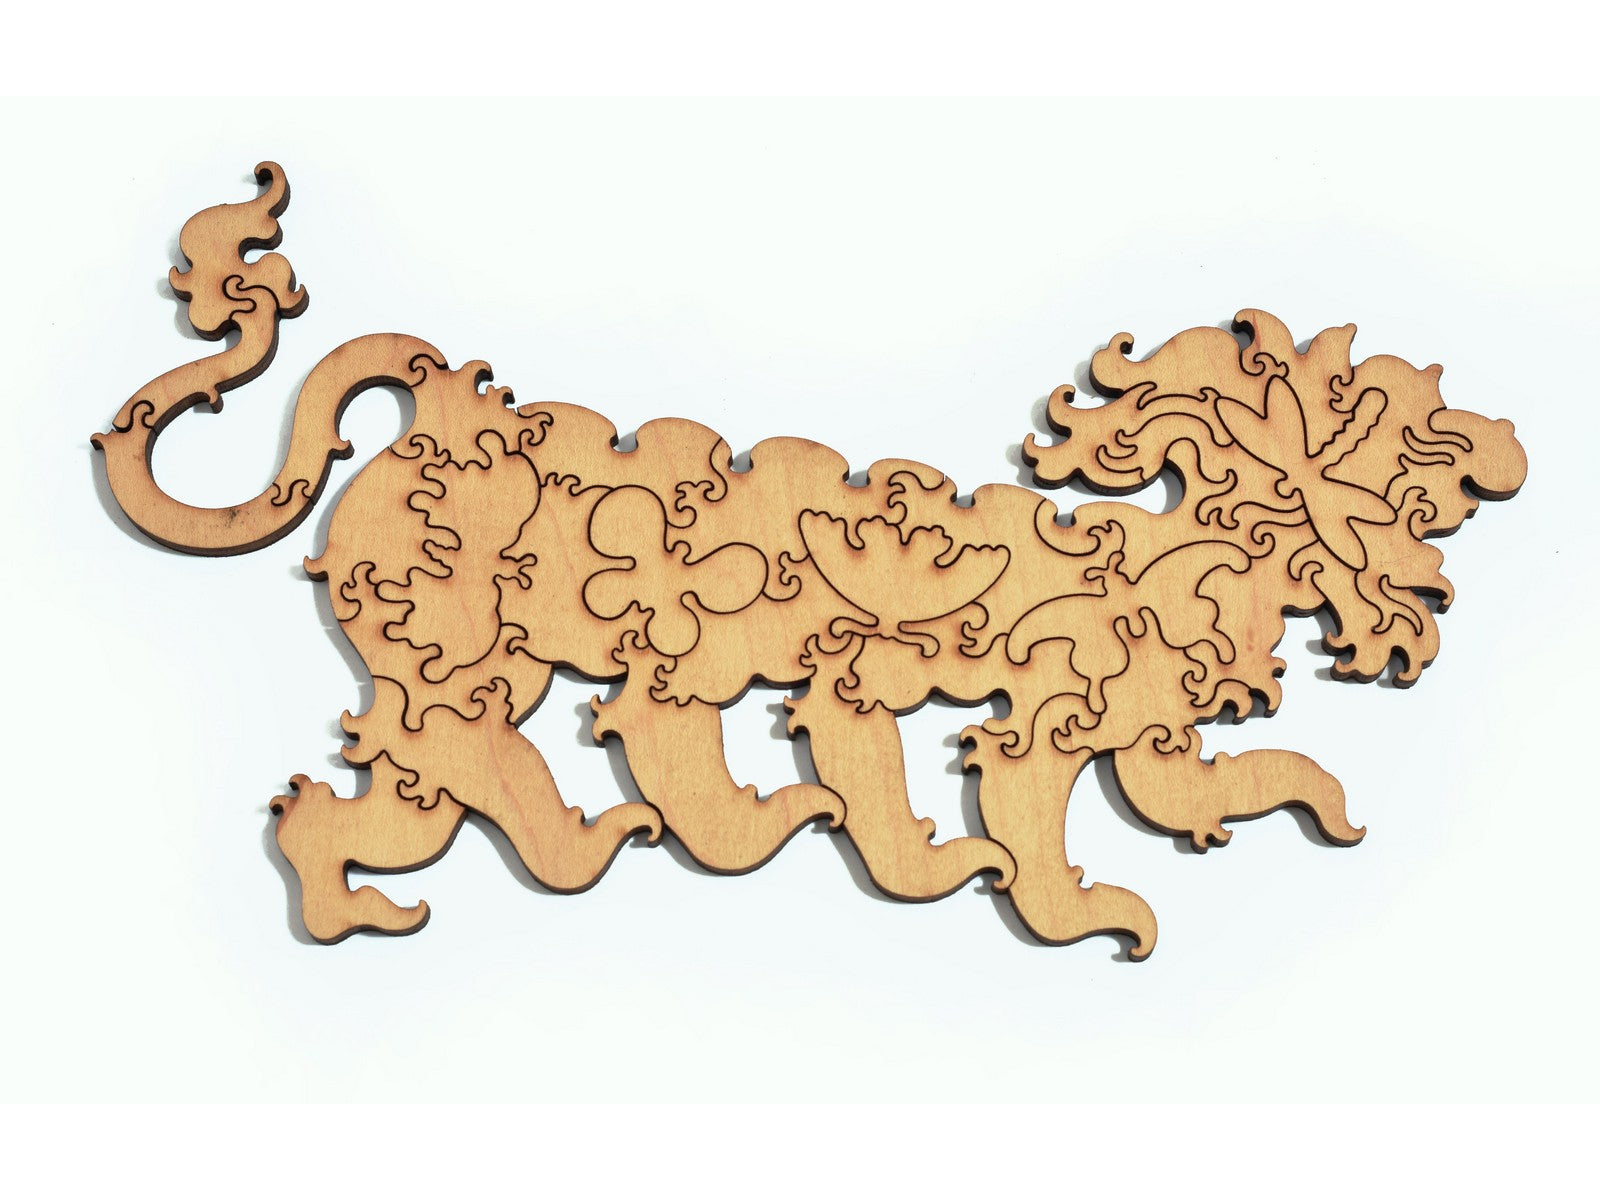 A closeup of pieces in the shape of a lion.